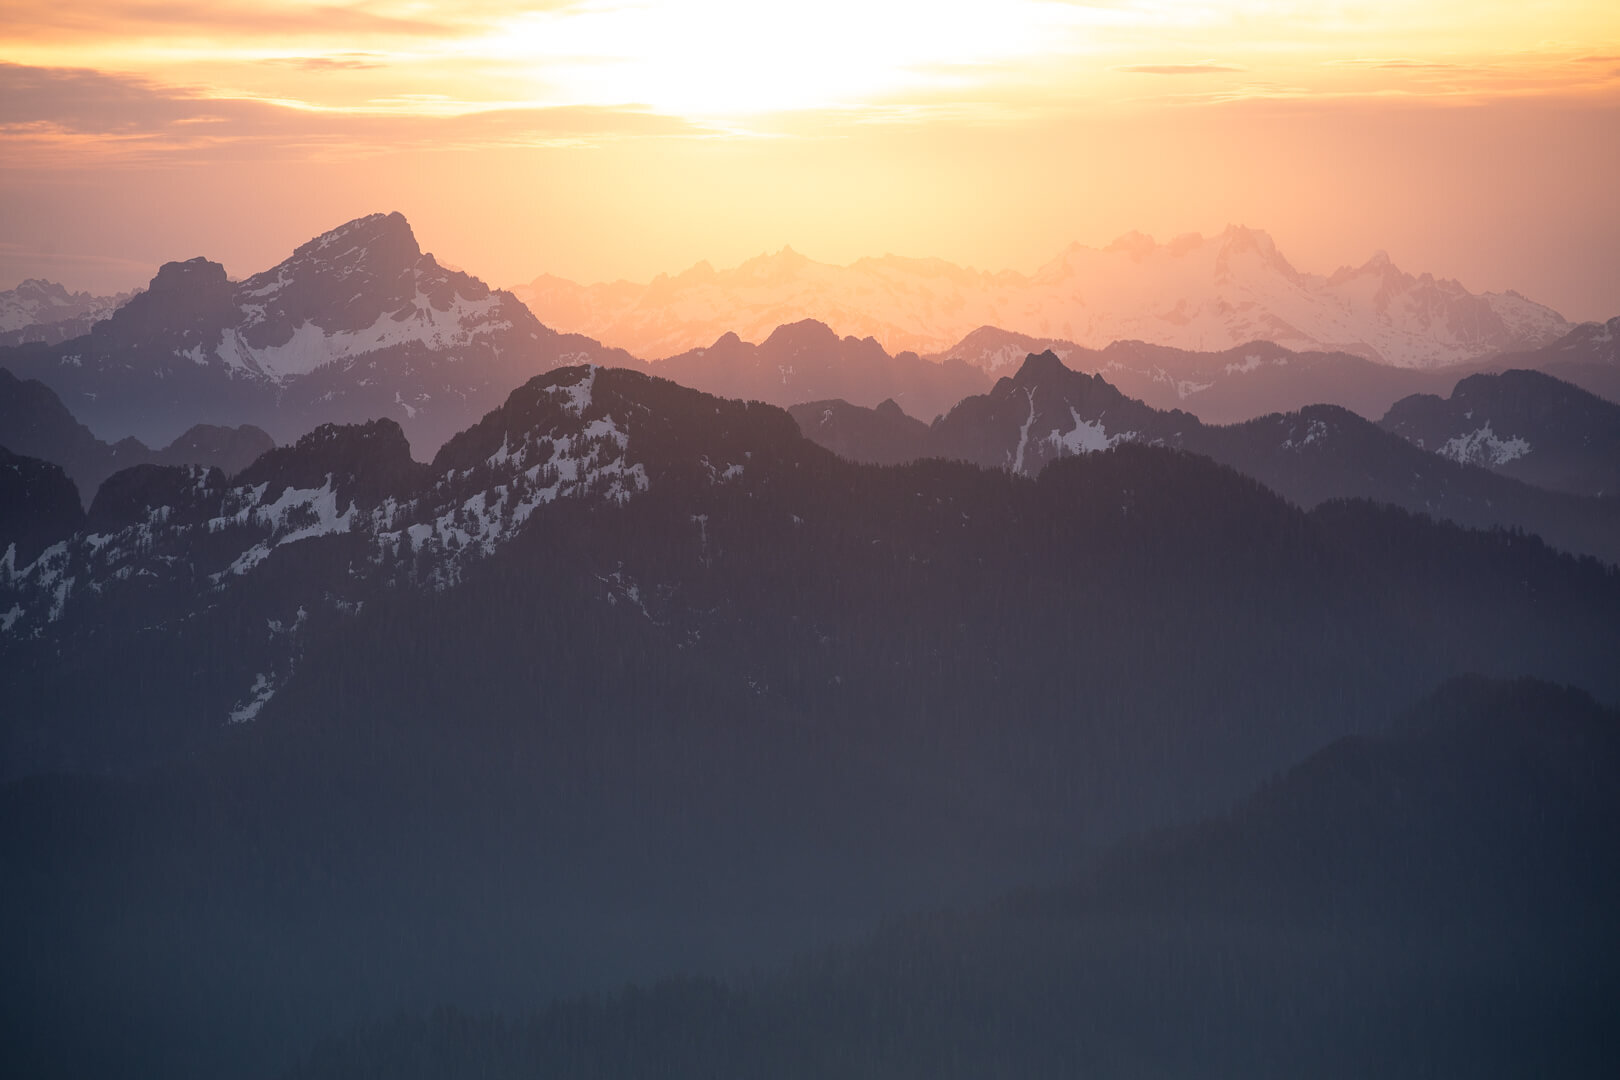 Beautiful sunset views from the Mount Pilchuck fire lookout.